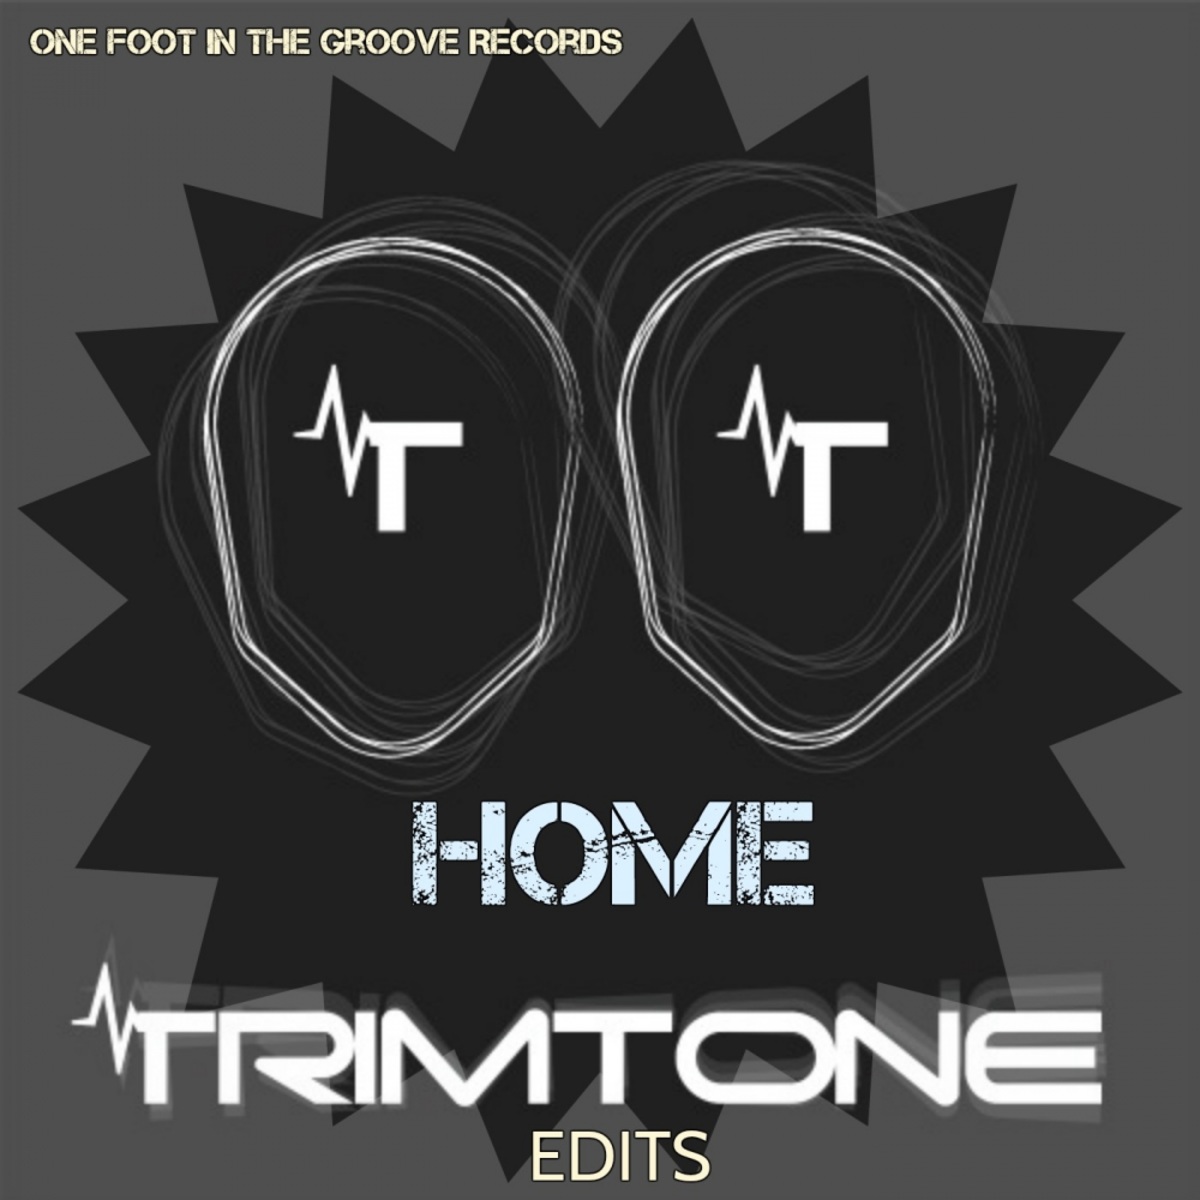 Trimtone - Home / One Foot In The Groove